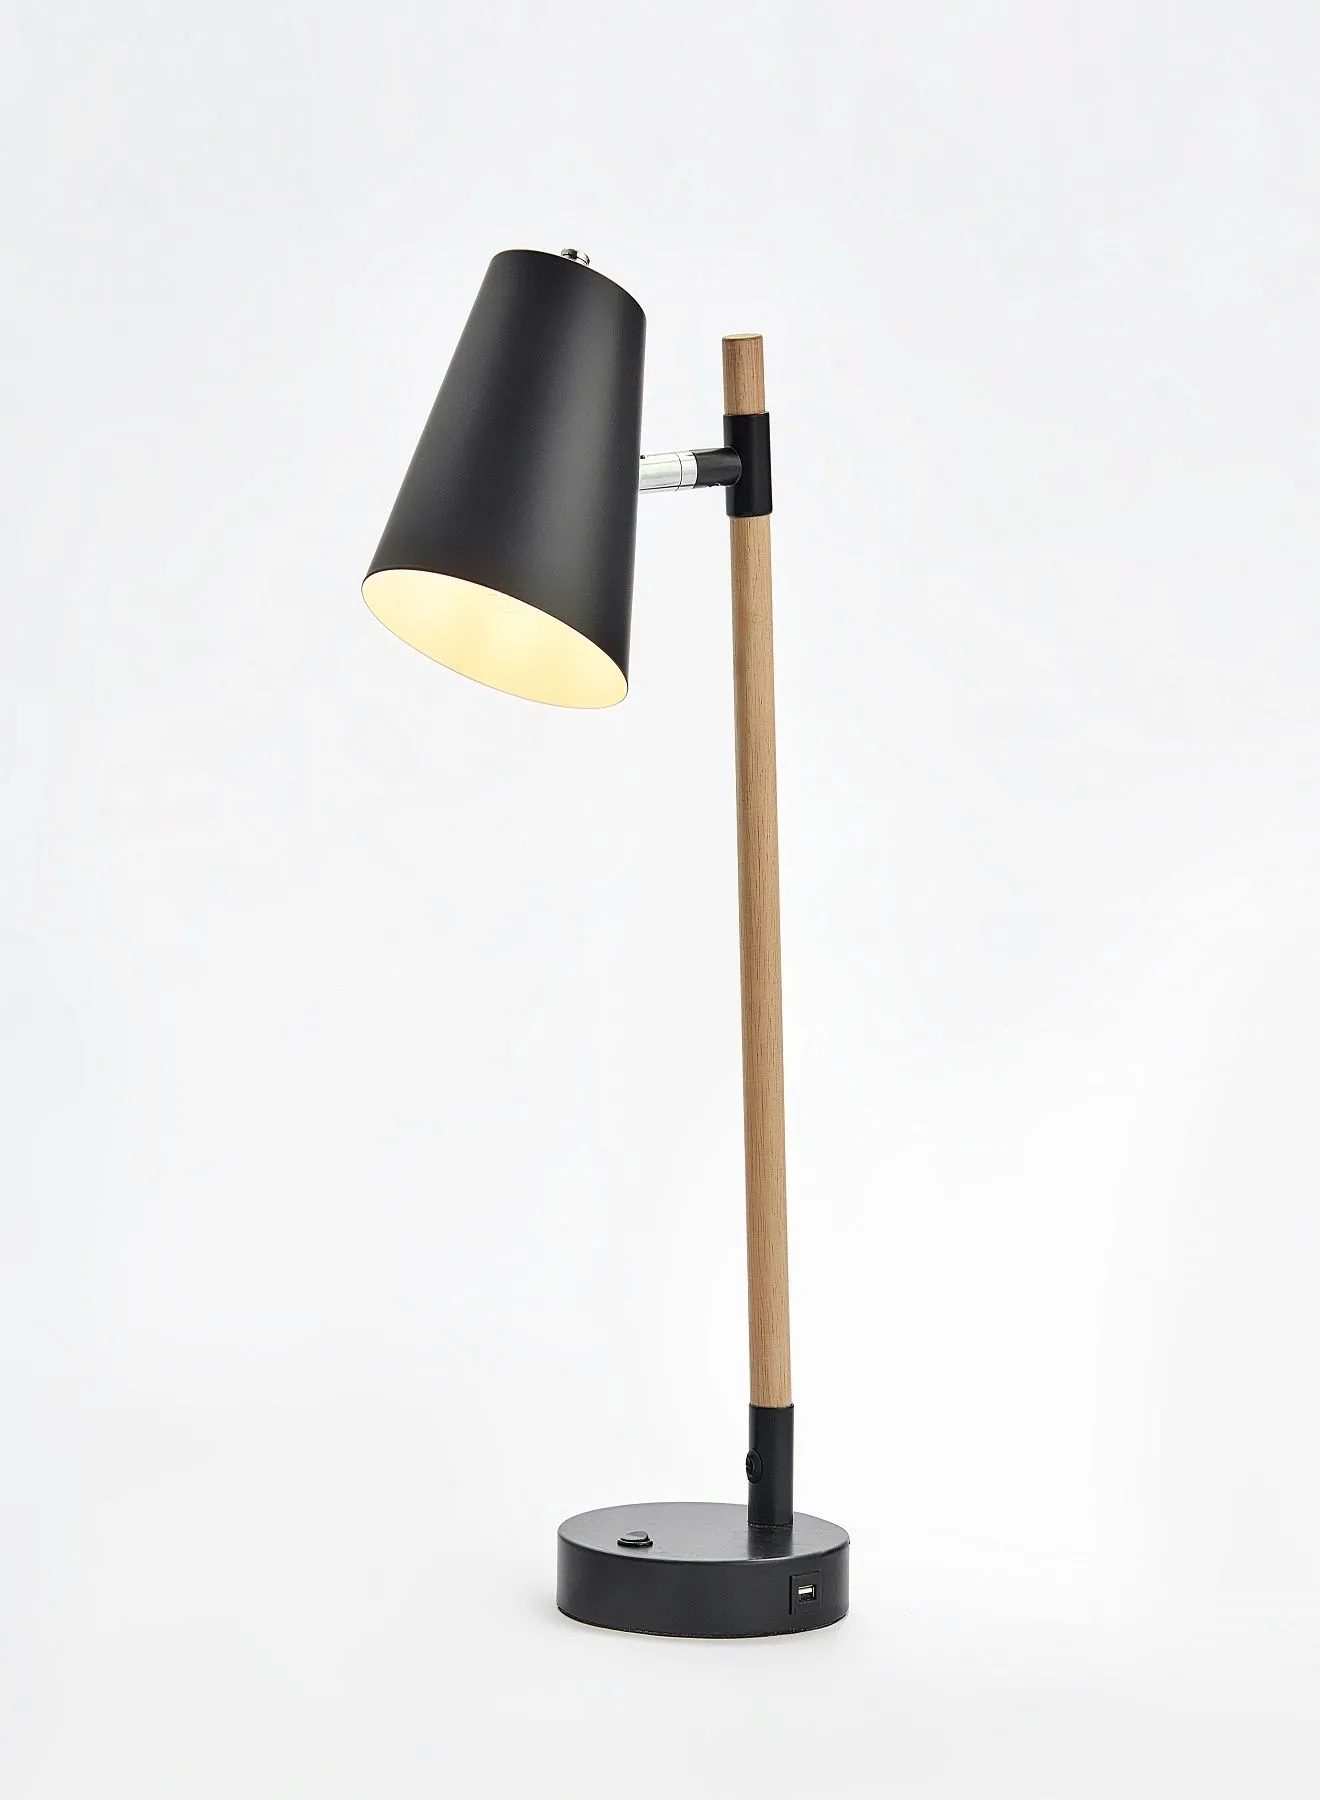 Switch Decorative Table Lamp Unique Luxury Quality Material for the Perfect Stylish Home TL000004 Black/Beige 28 x 16 x 56cm